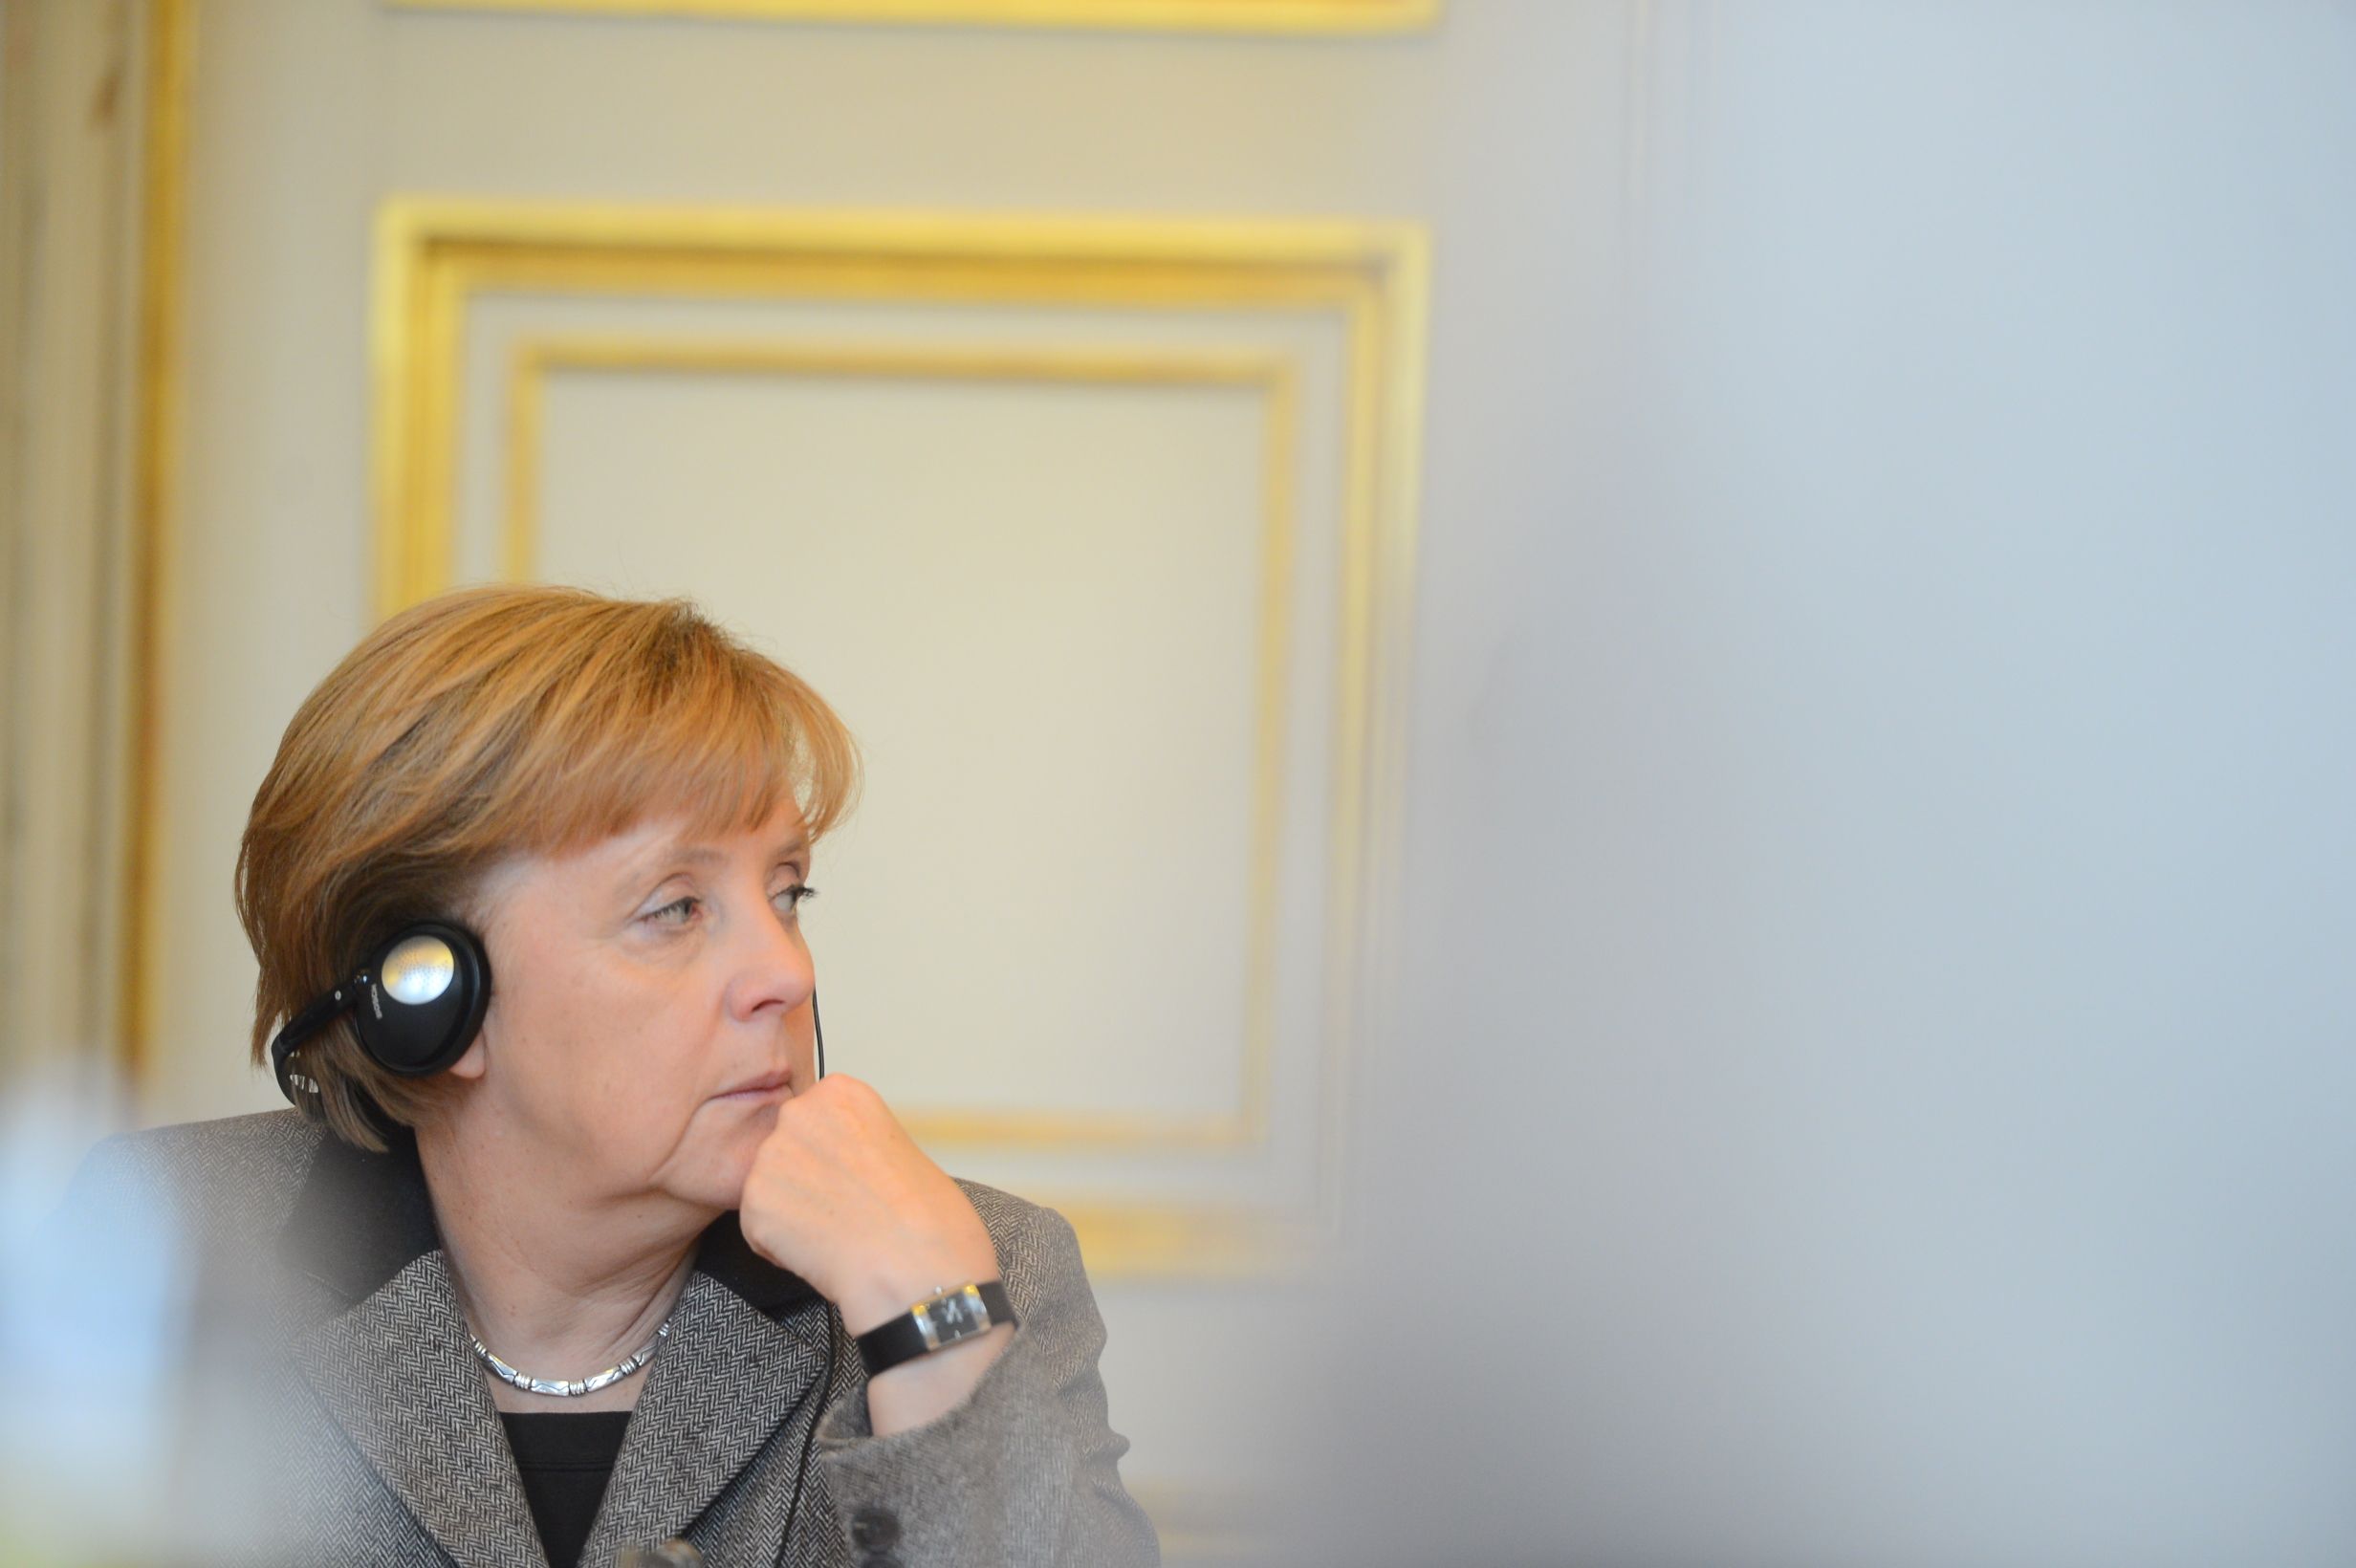 German Chancellor Angela Merkel. Image courtesy of European People's Party. Germany, 2012.